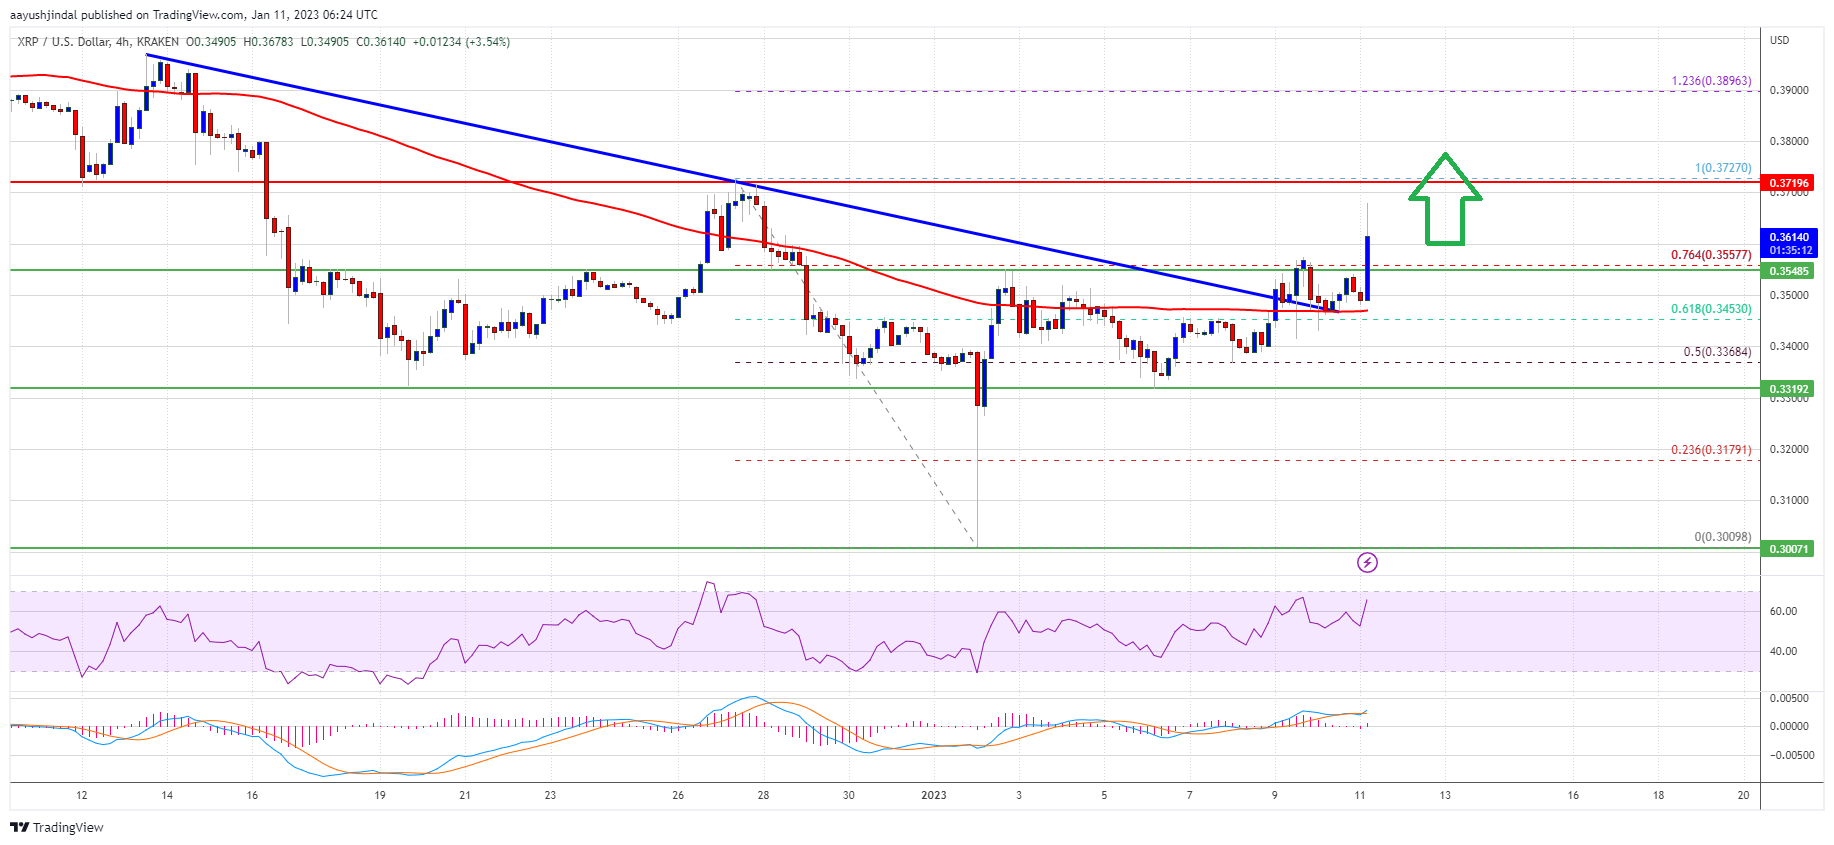 XRP Price Prediction: Bulls Could Aim $0.4 or Higher Forks Daily